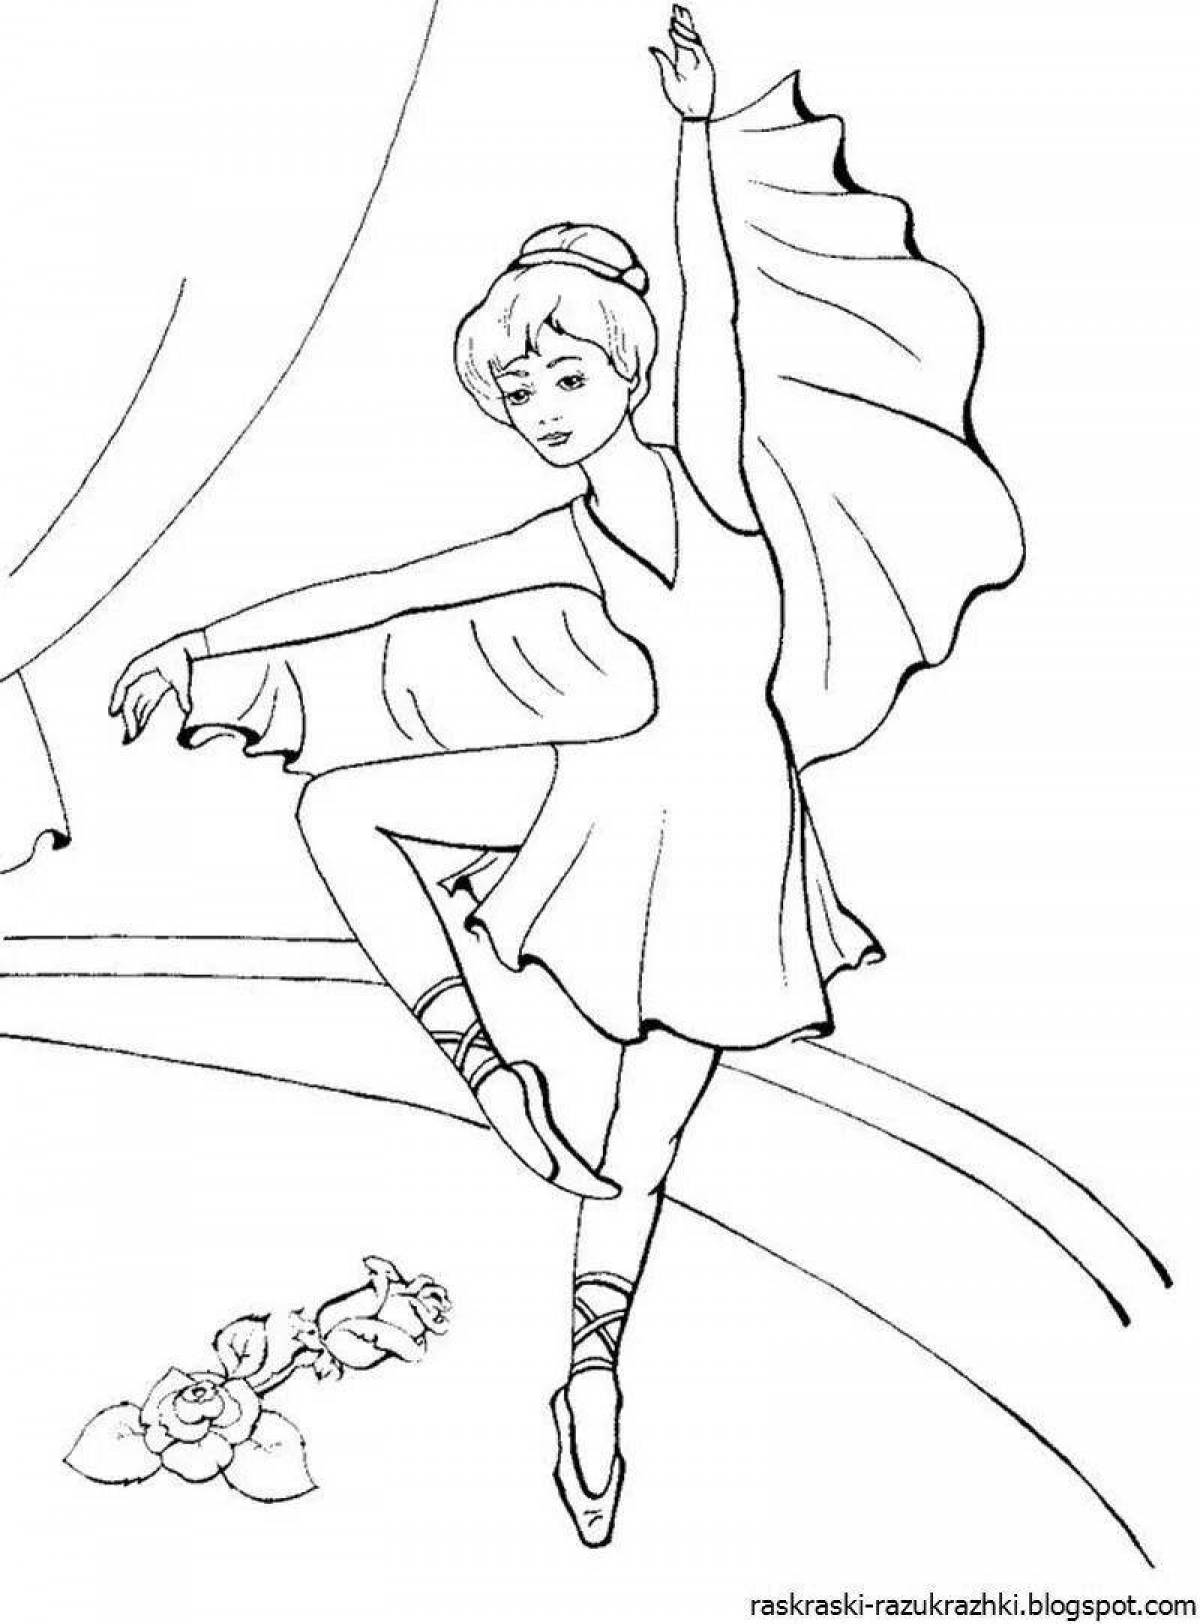 Creative ballet coloring book for kids